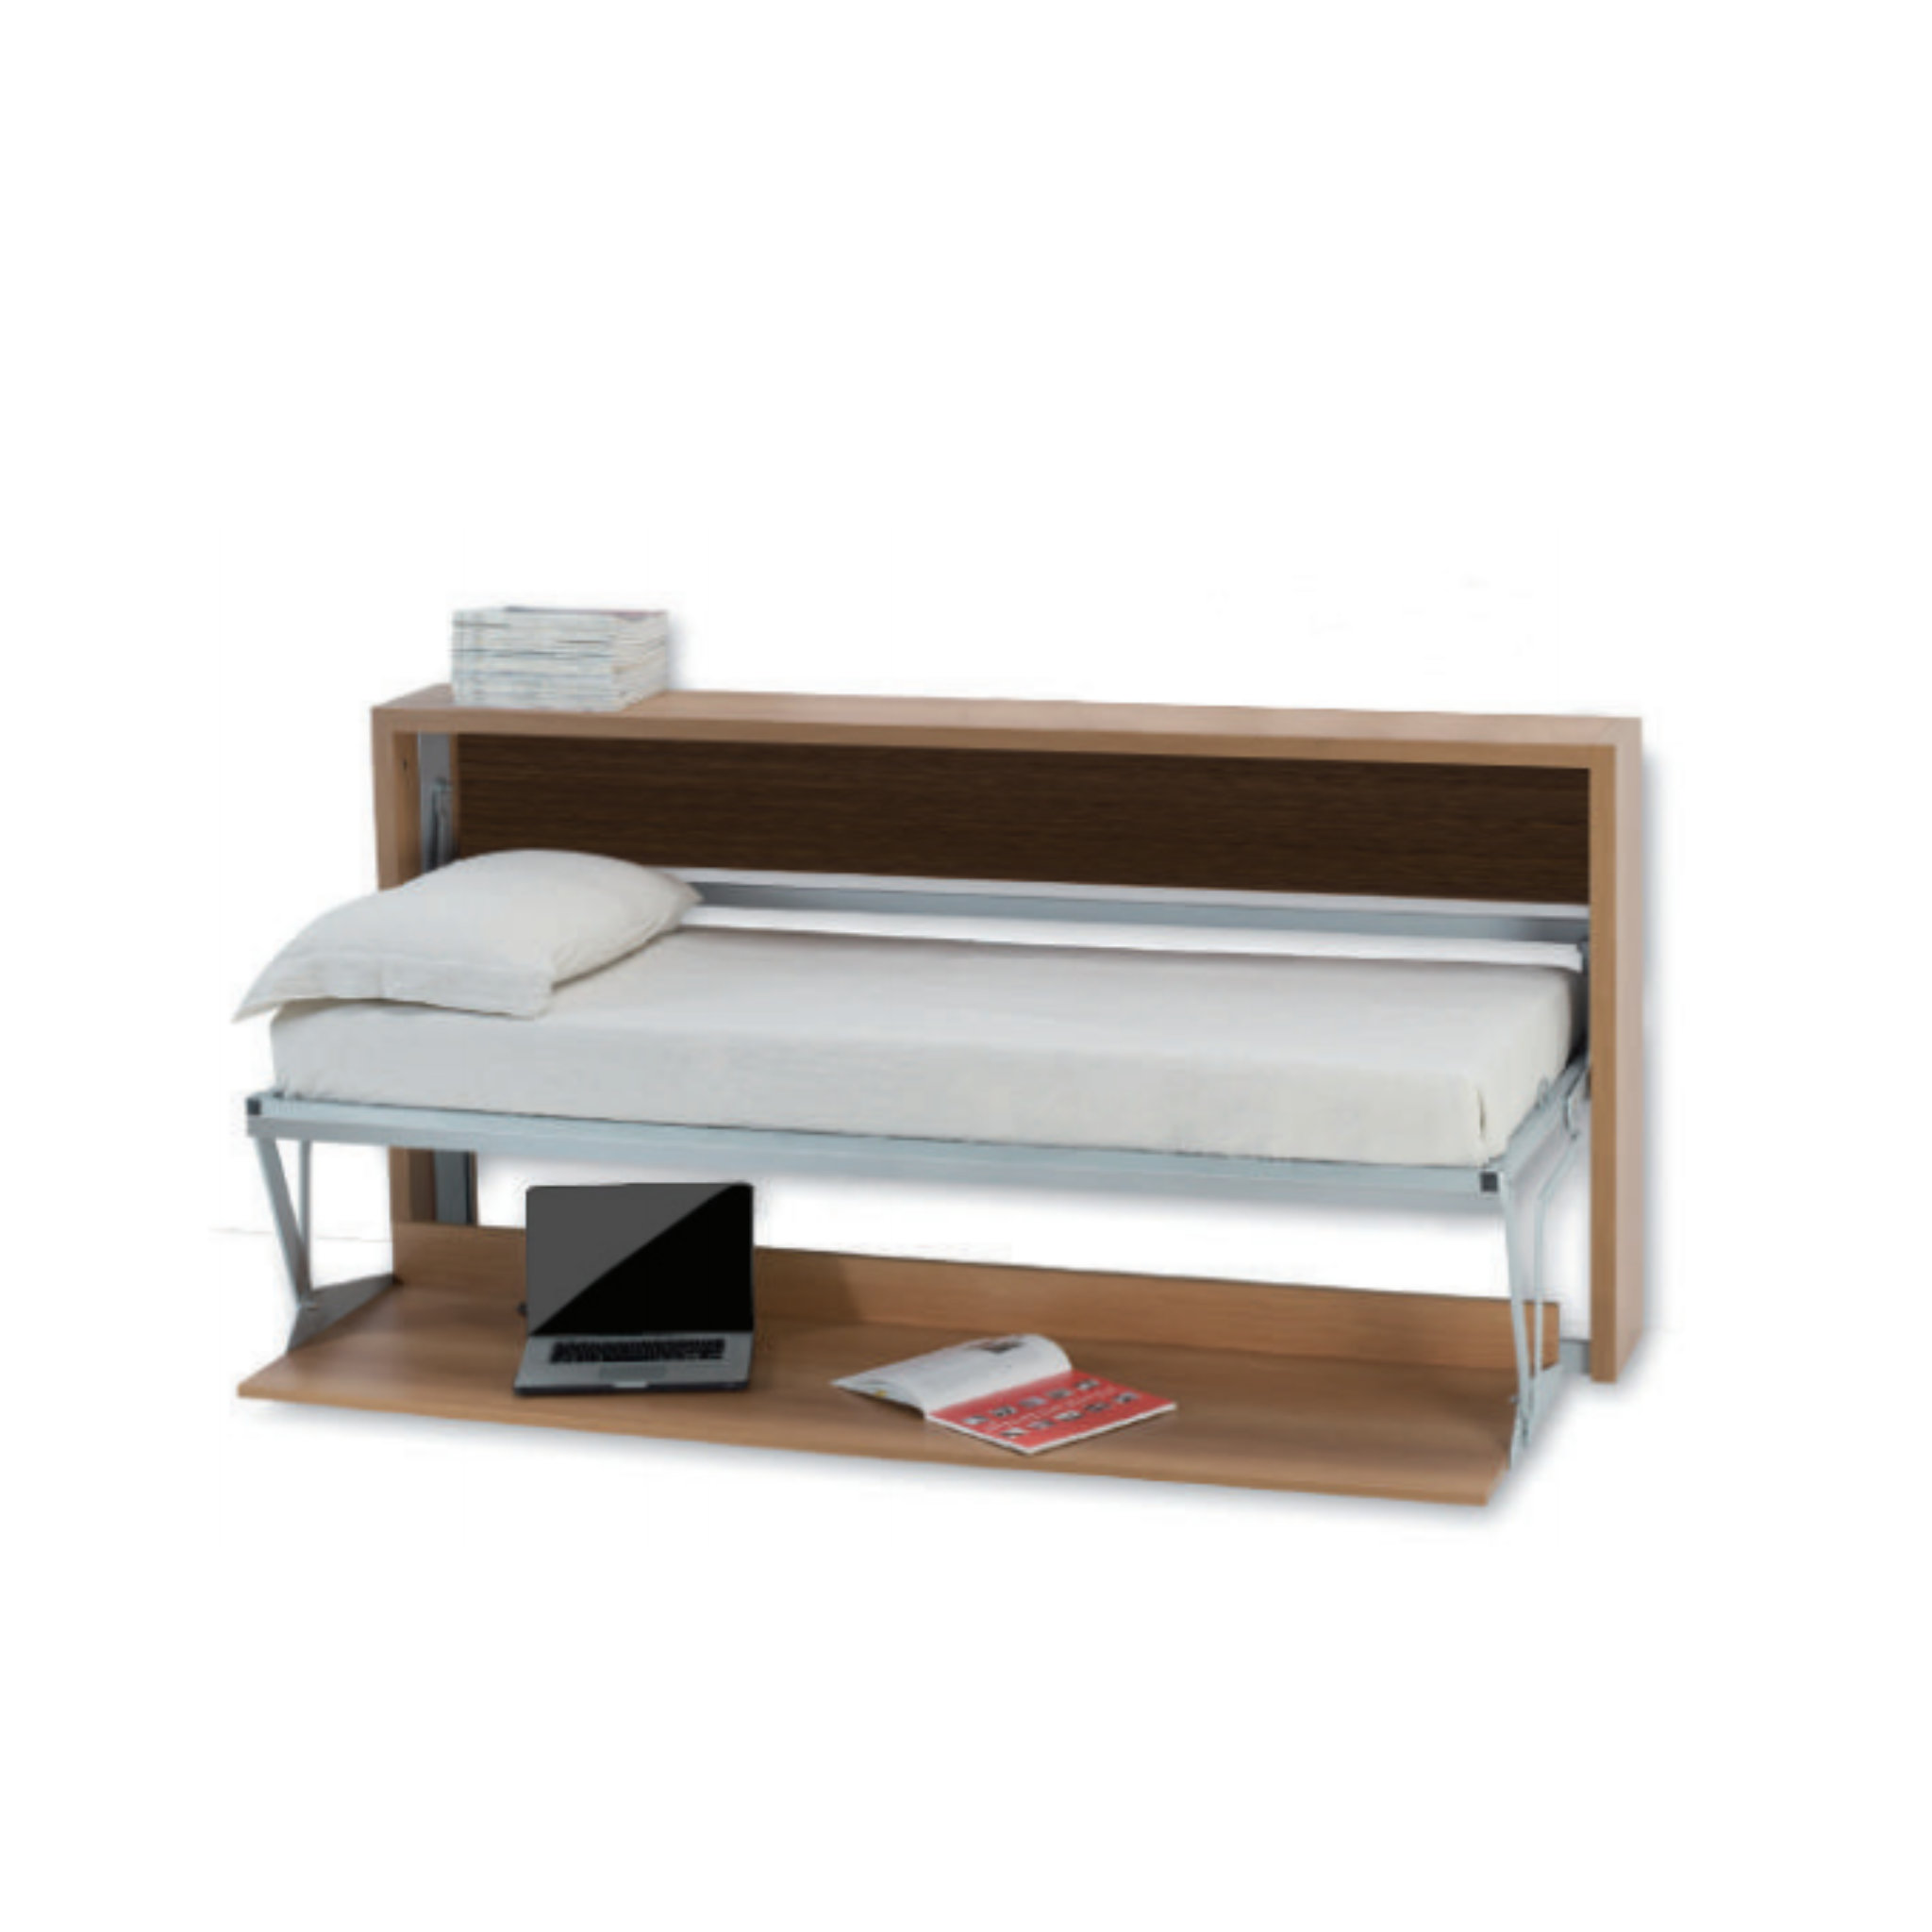 Compatto - Horizontal Twin Bed With Floating Desk - Expand Furniture -  Folding Tables, Smarter Wall Beds, Space Savers